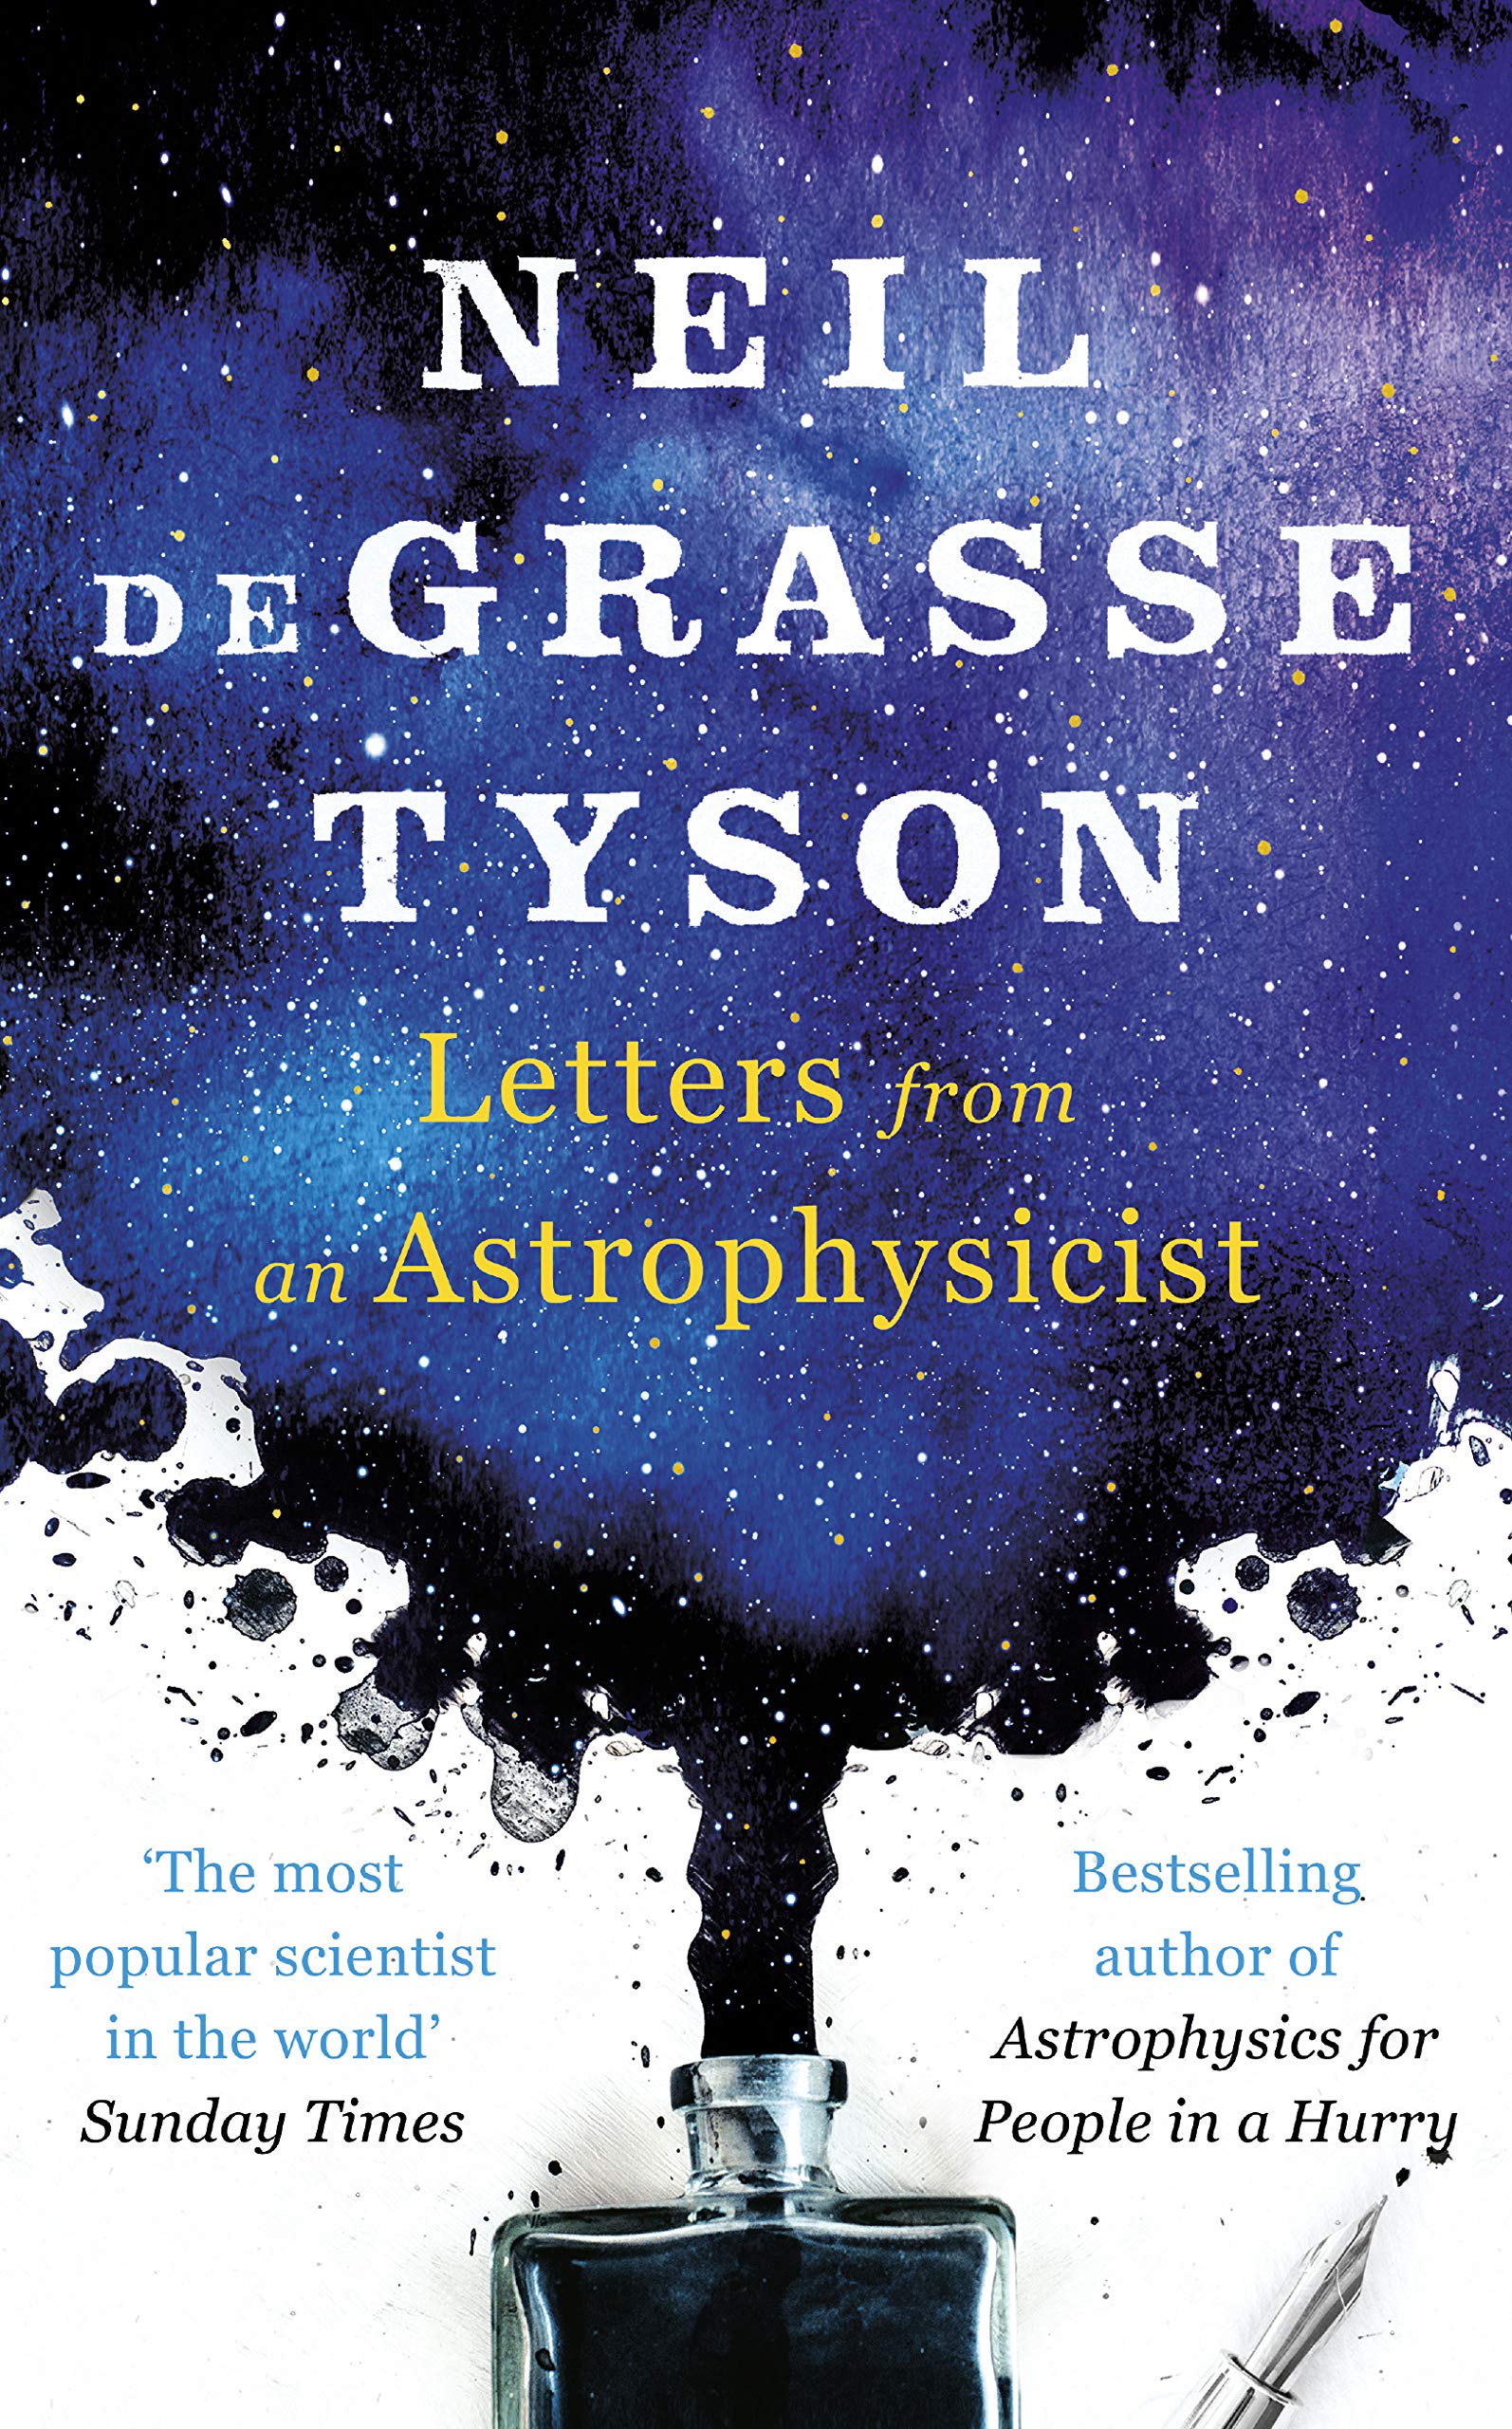 Neil deGrasse Tyson: Letters from an Astrophysicist (2019, Ebury Publishing)